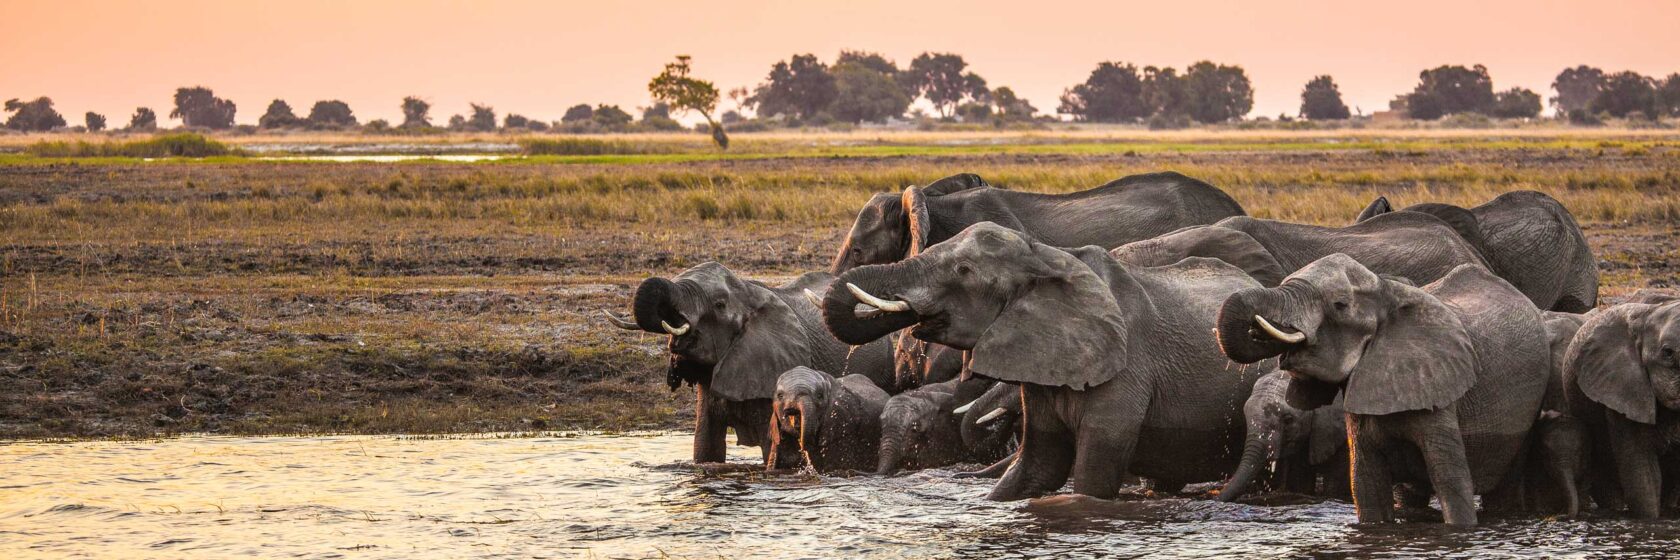 Elephants by the water.